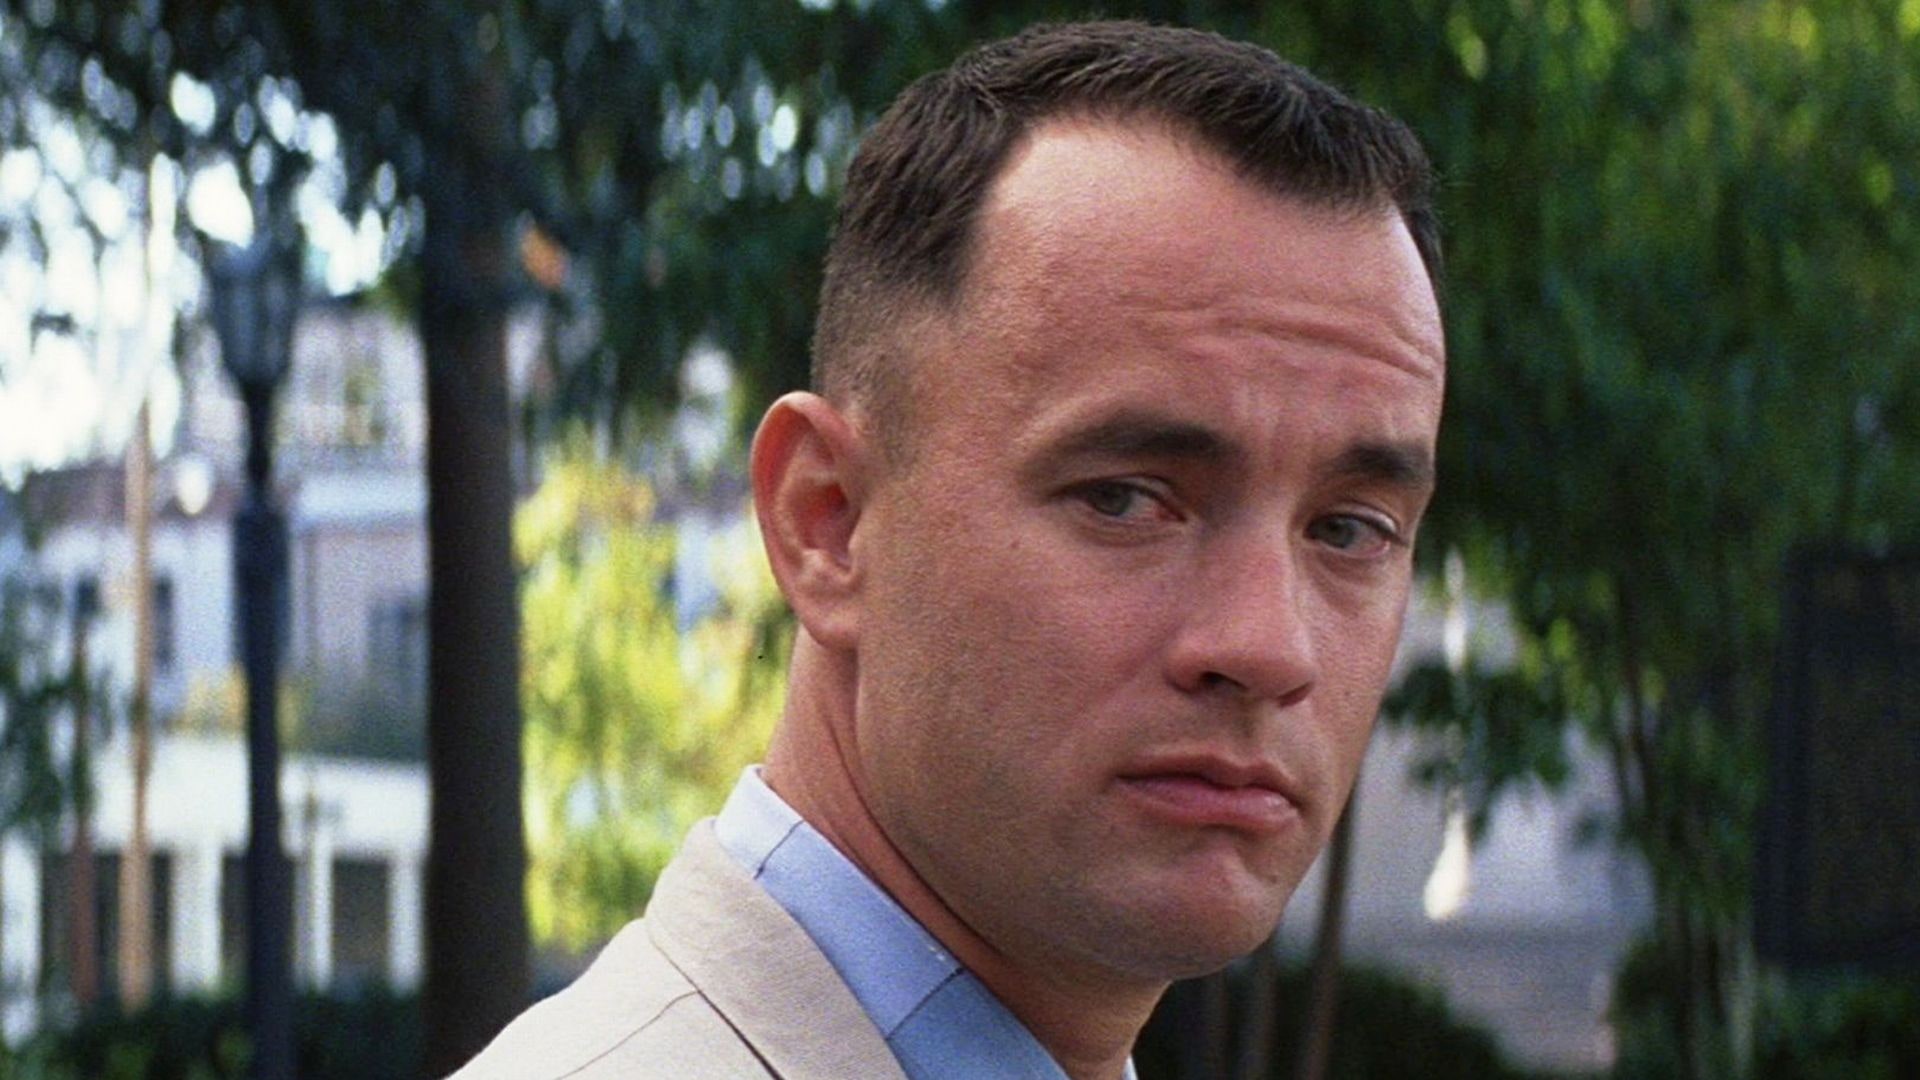 Why Forrest Gump is a poisonous film